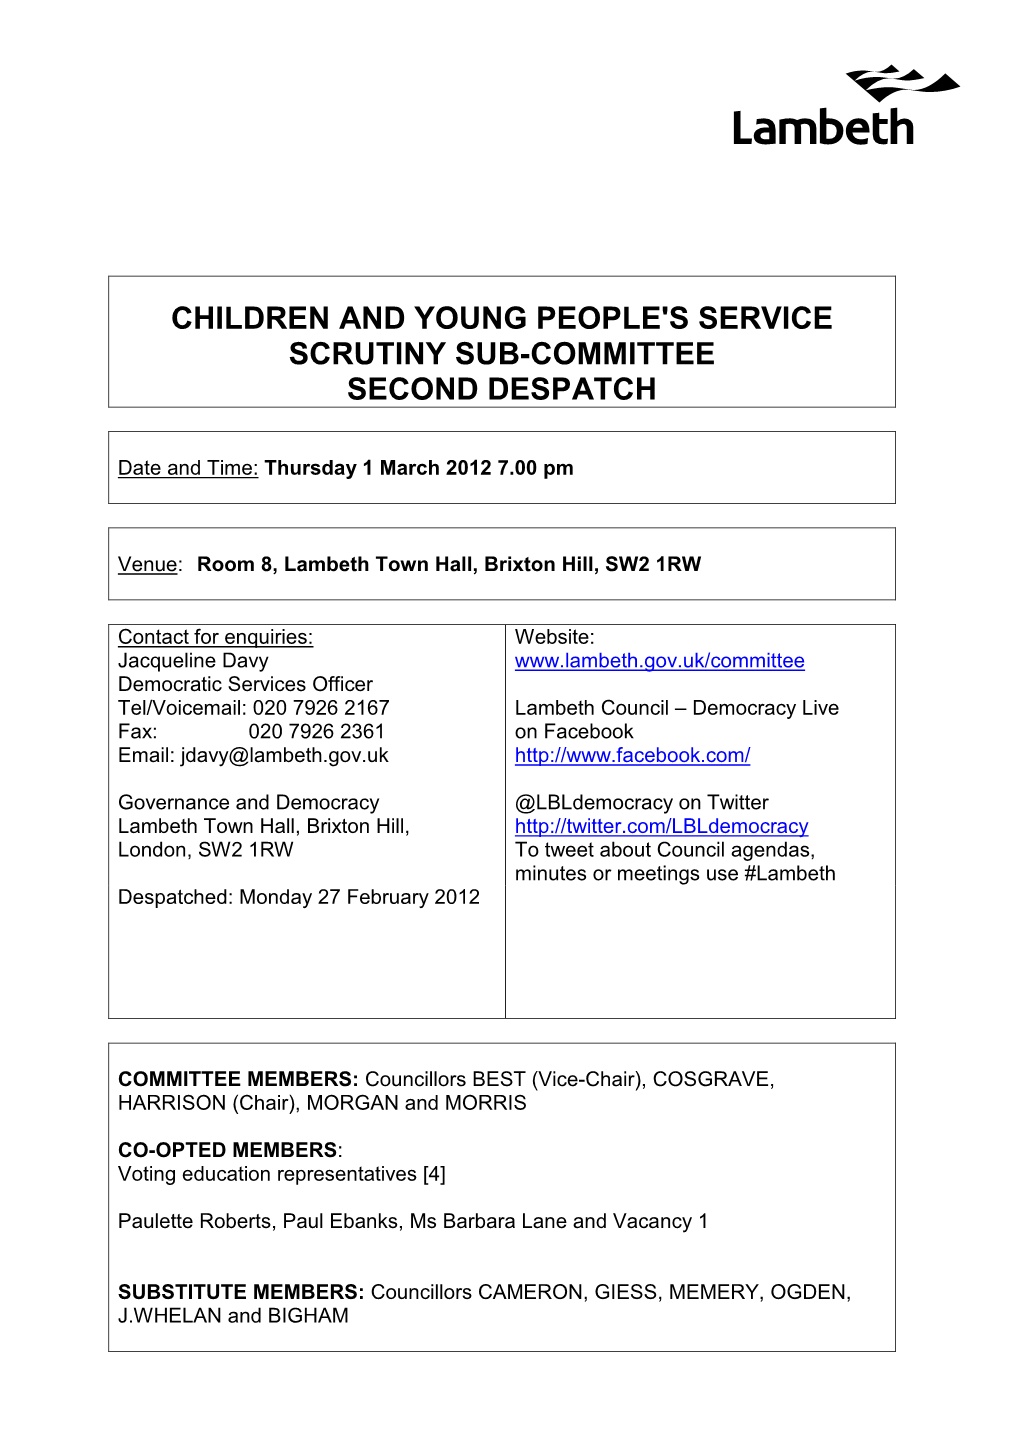 Children and Young People's Service Scrutiny Sub-Committee Second Despatch